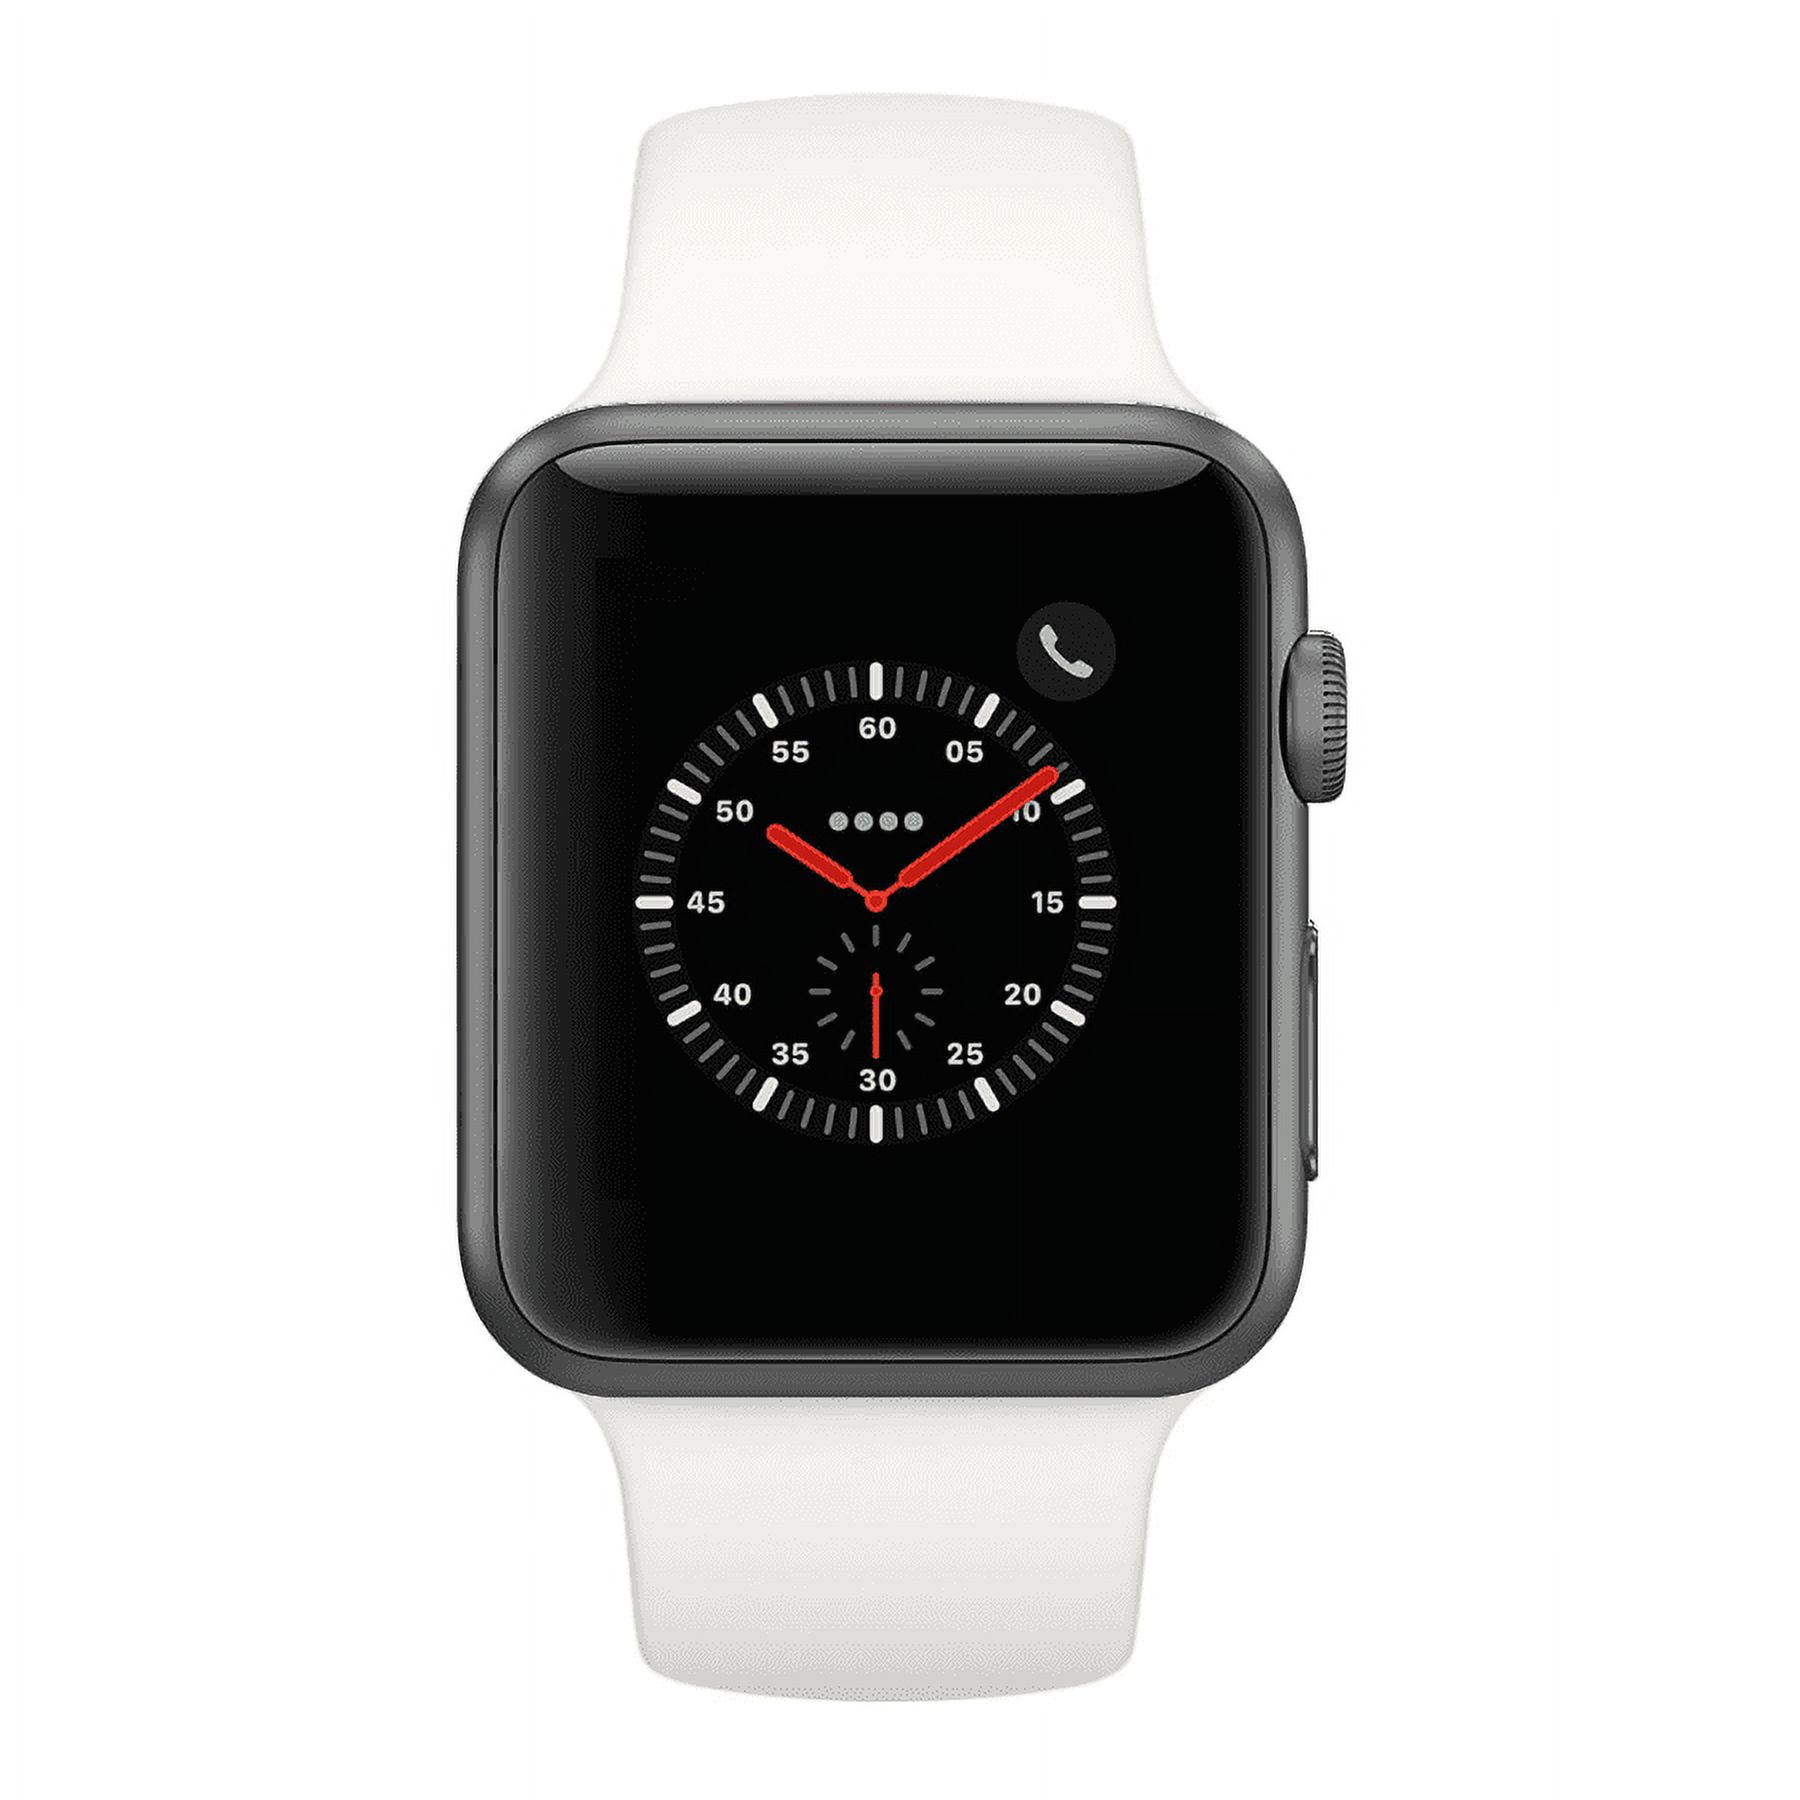 Apple Watch Series 3, 38MM, GPS, Space Gray Aluminum Case, Soft White Sport  Band (Non-Retail Packaging)